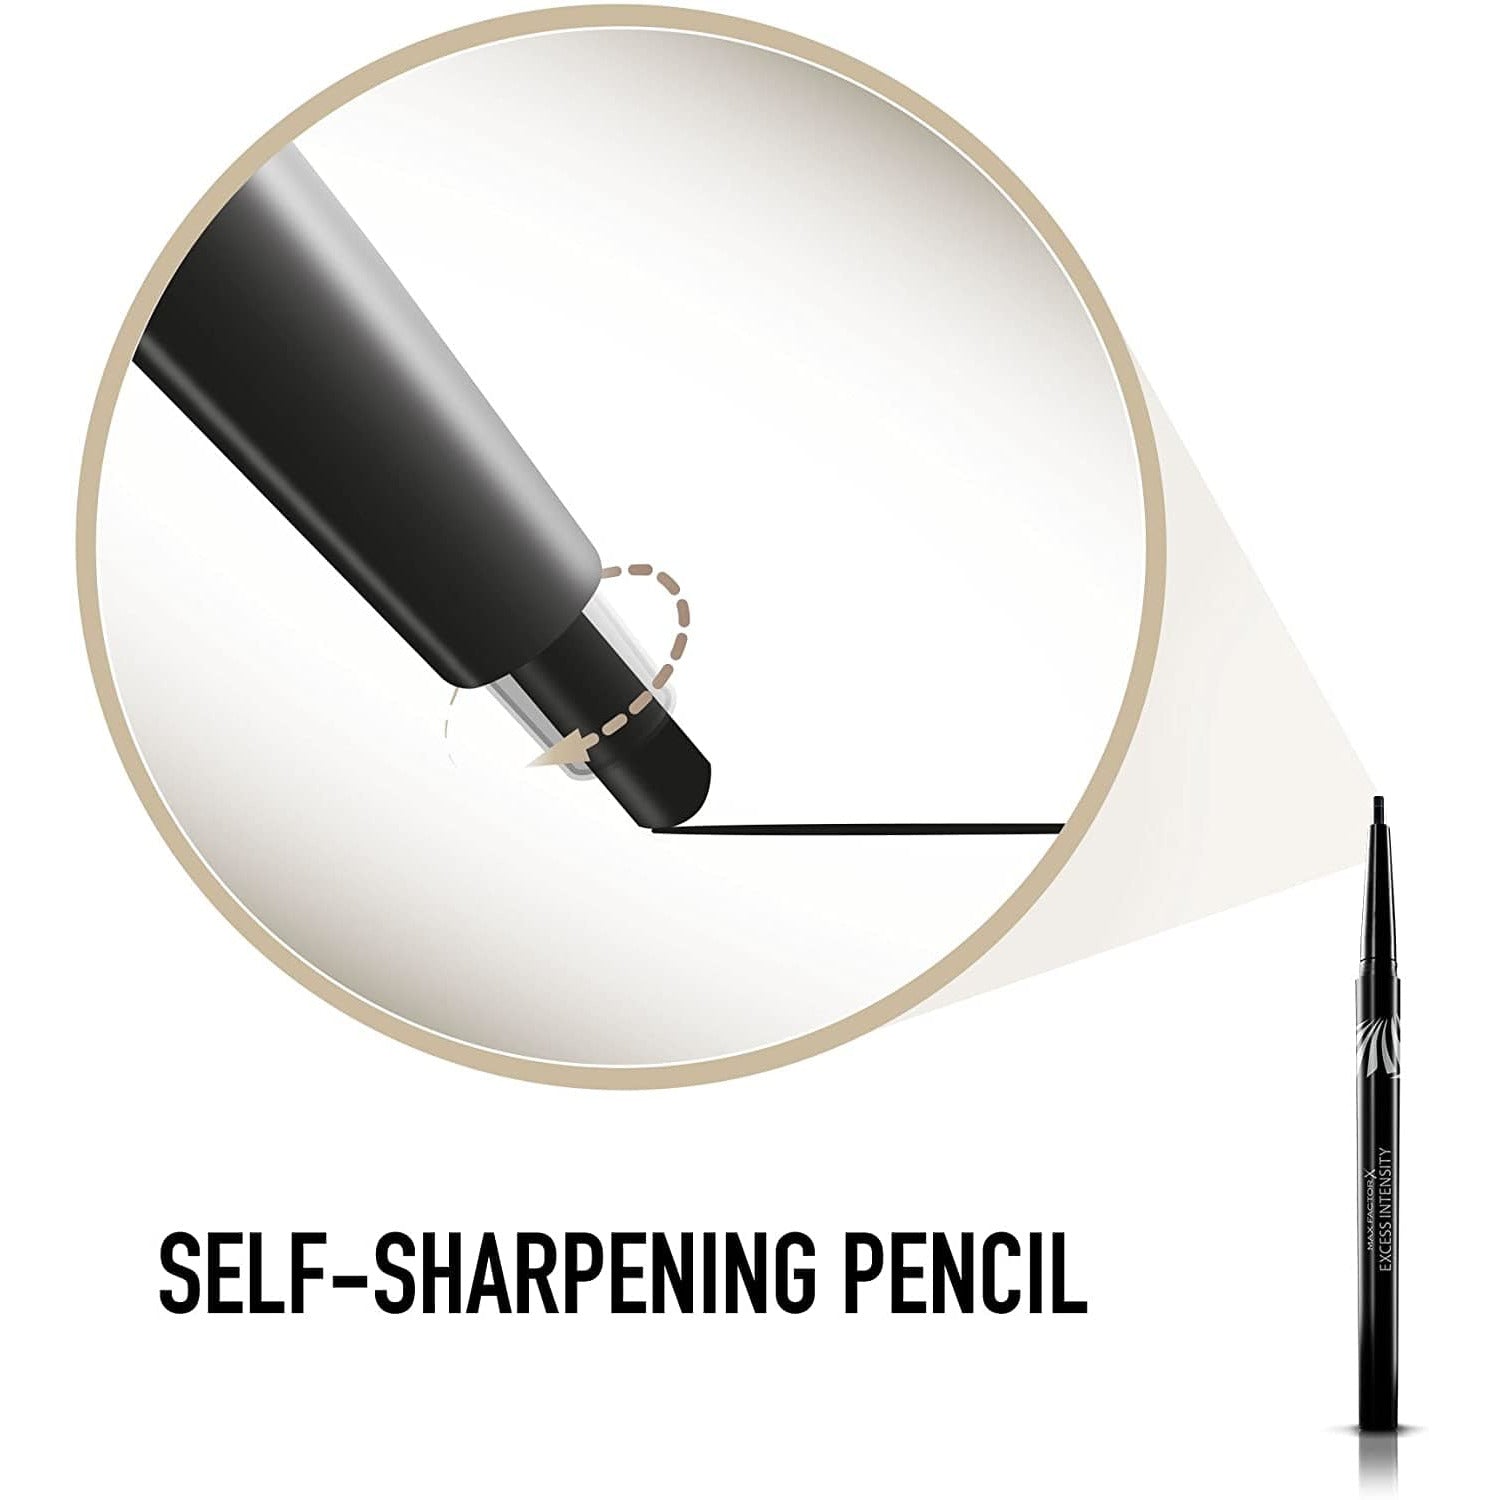 Max Factor Excess Volume Long Wear Eyeliner - Give Us Beauty